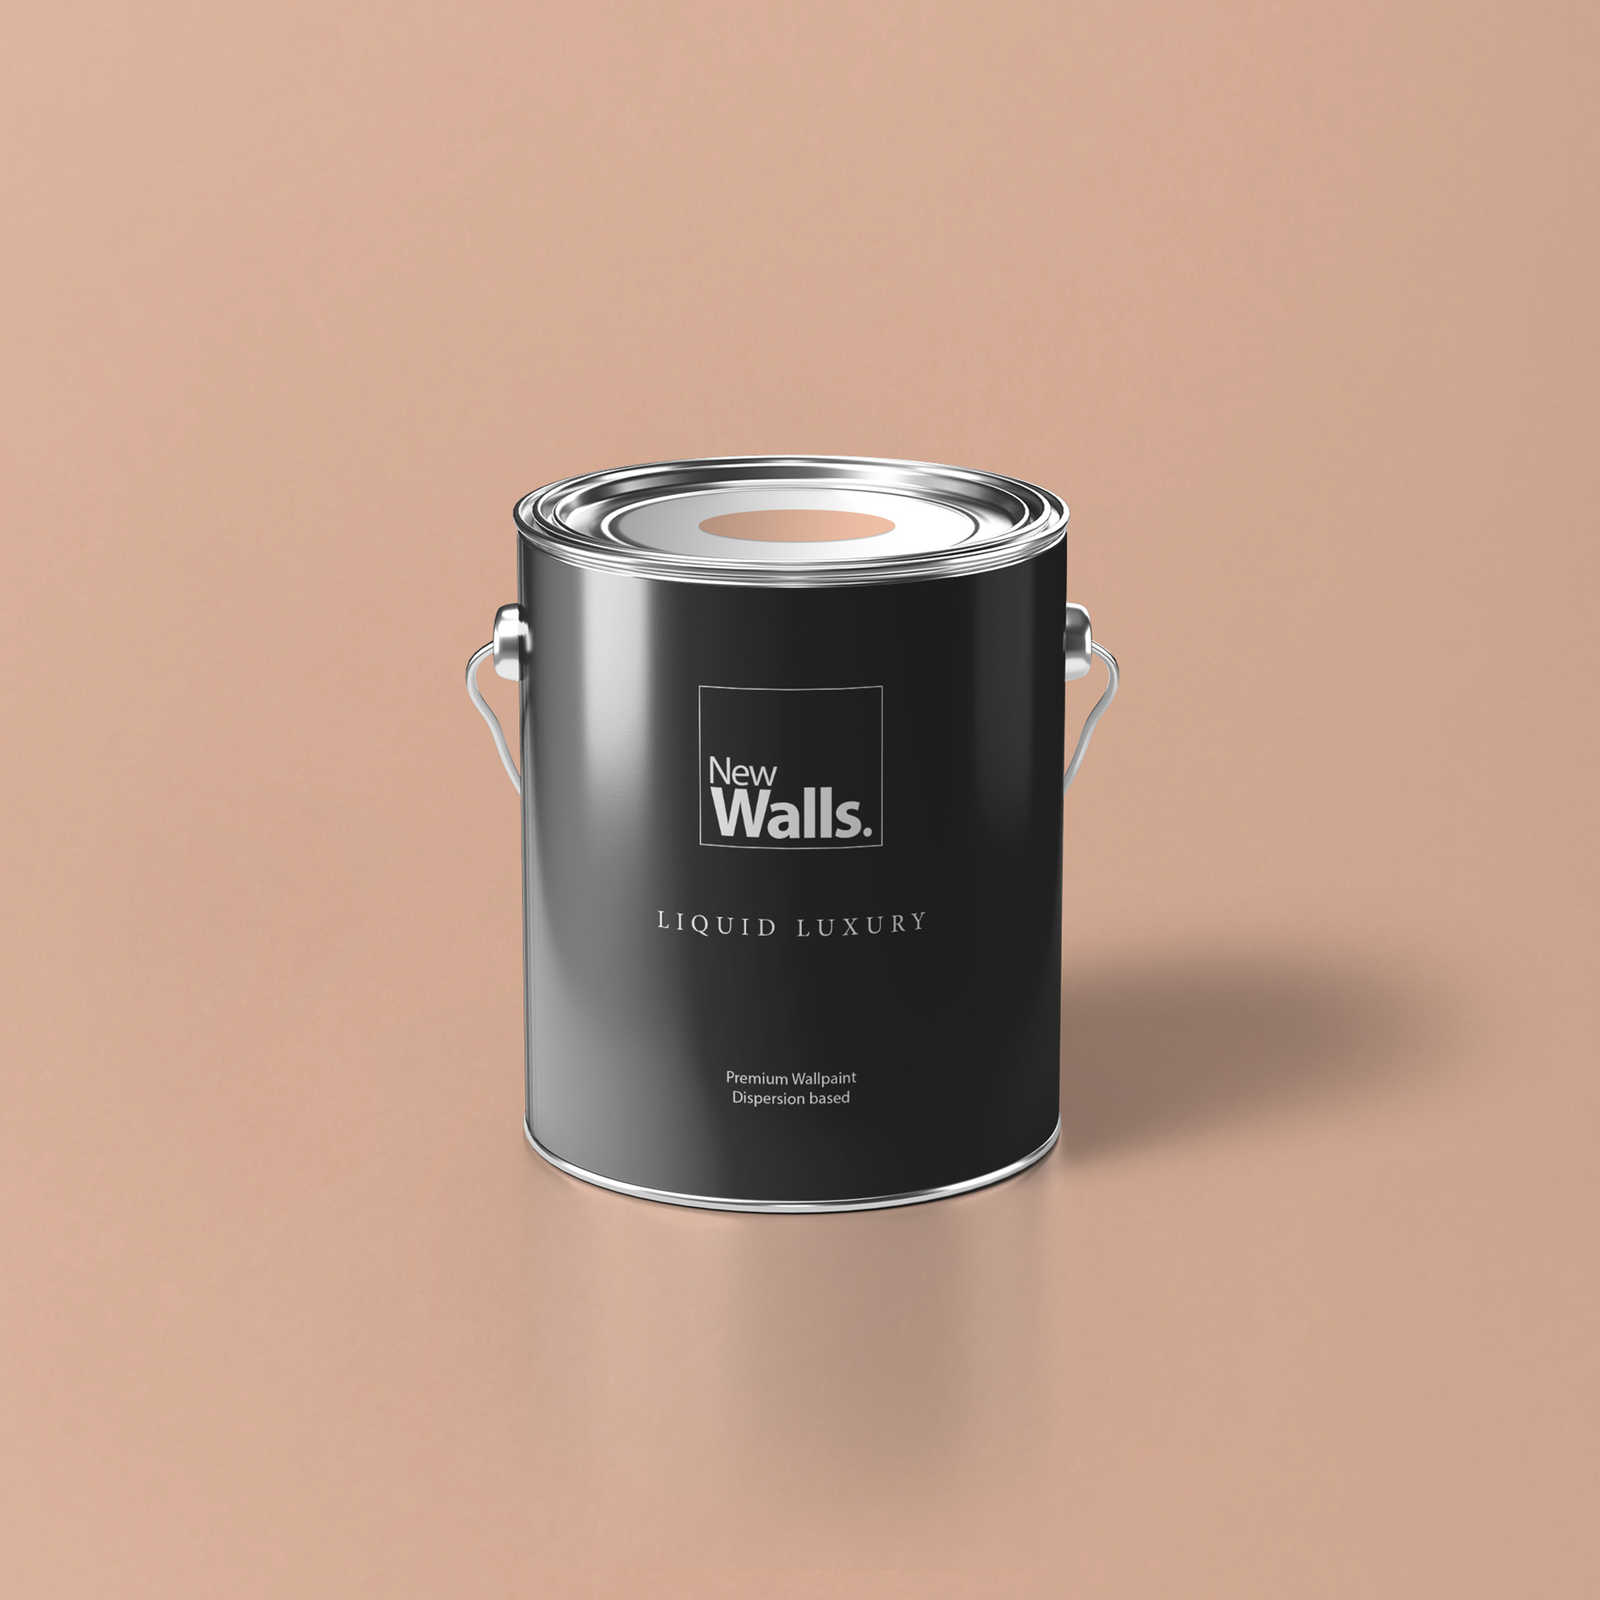 Premium Wall Paint serene salmon »Active Apricot« NW912 – 2.5 litre
